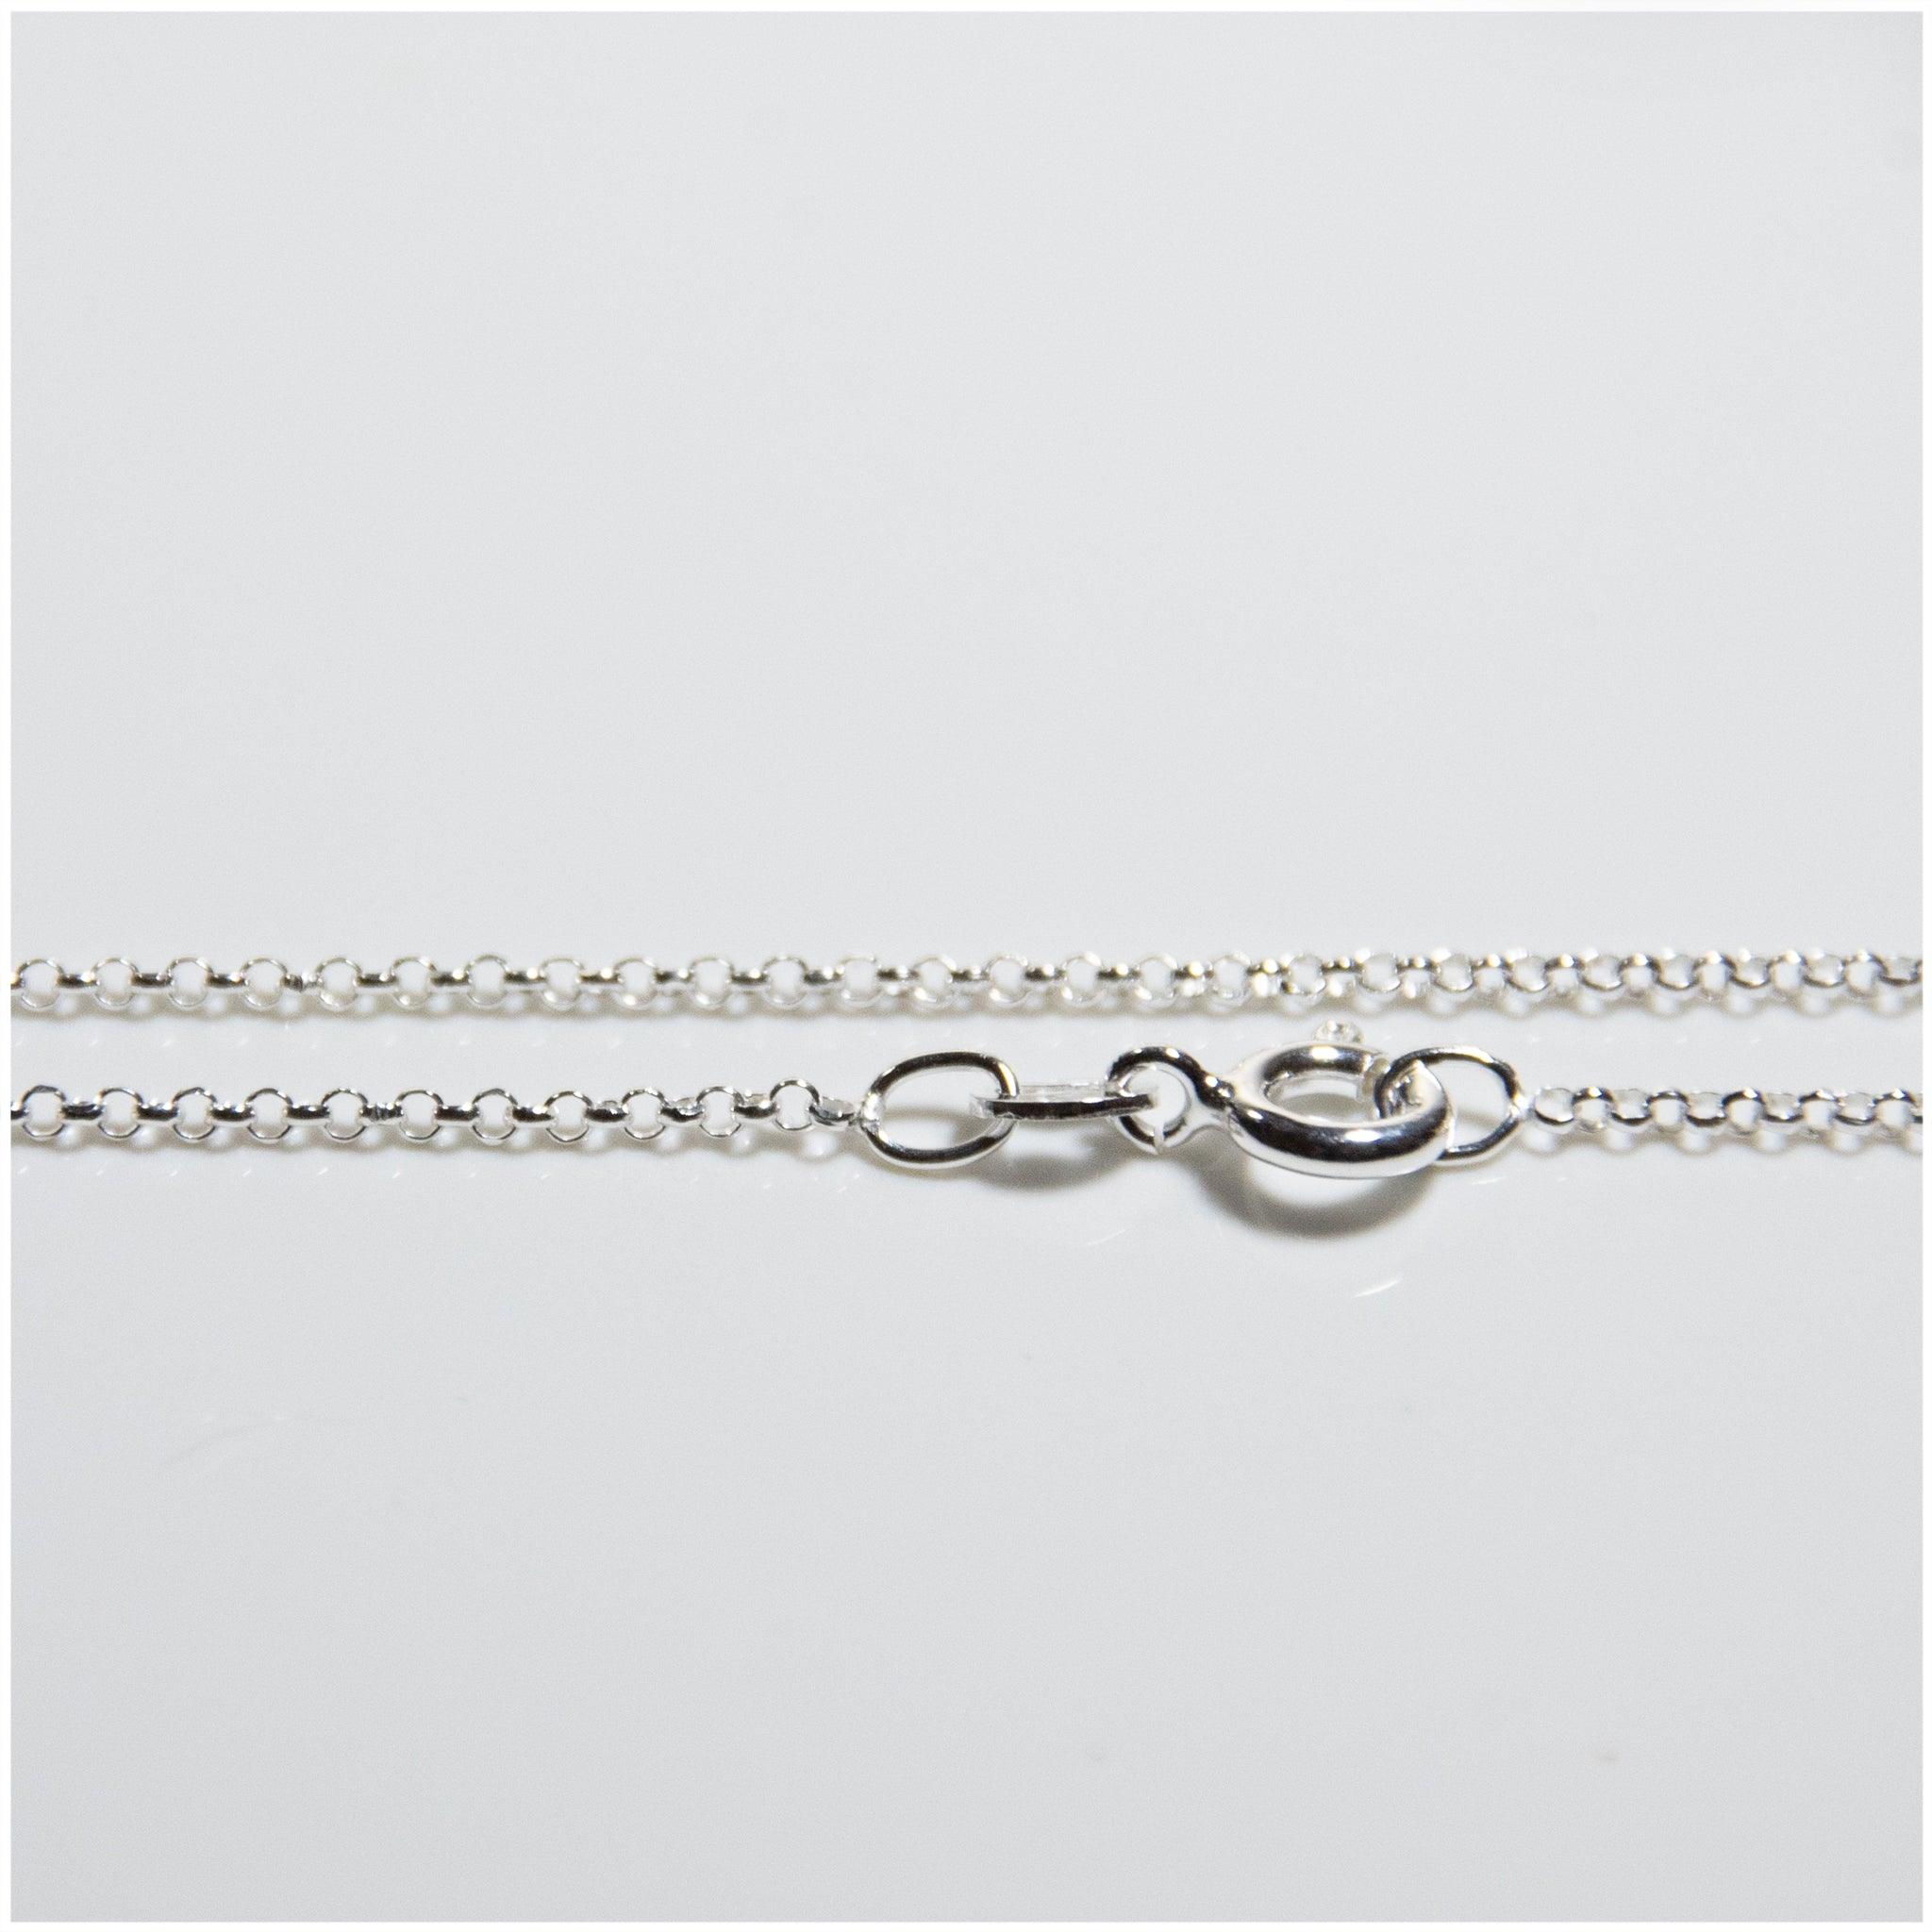 C026 - Sterling Silver Chain